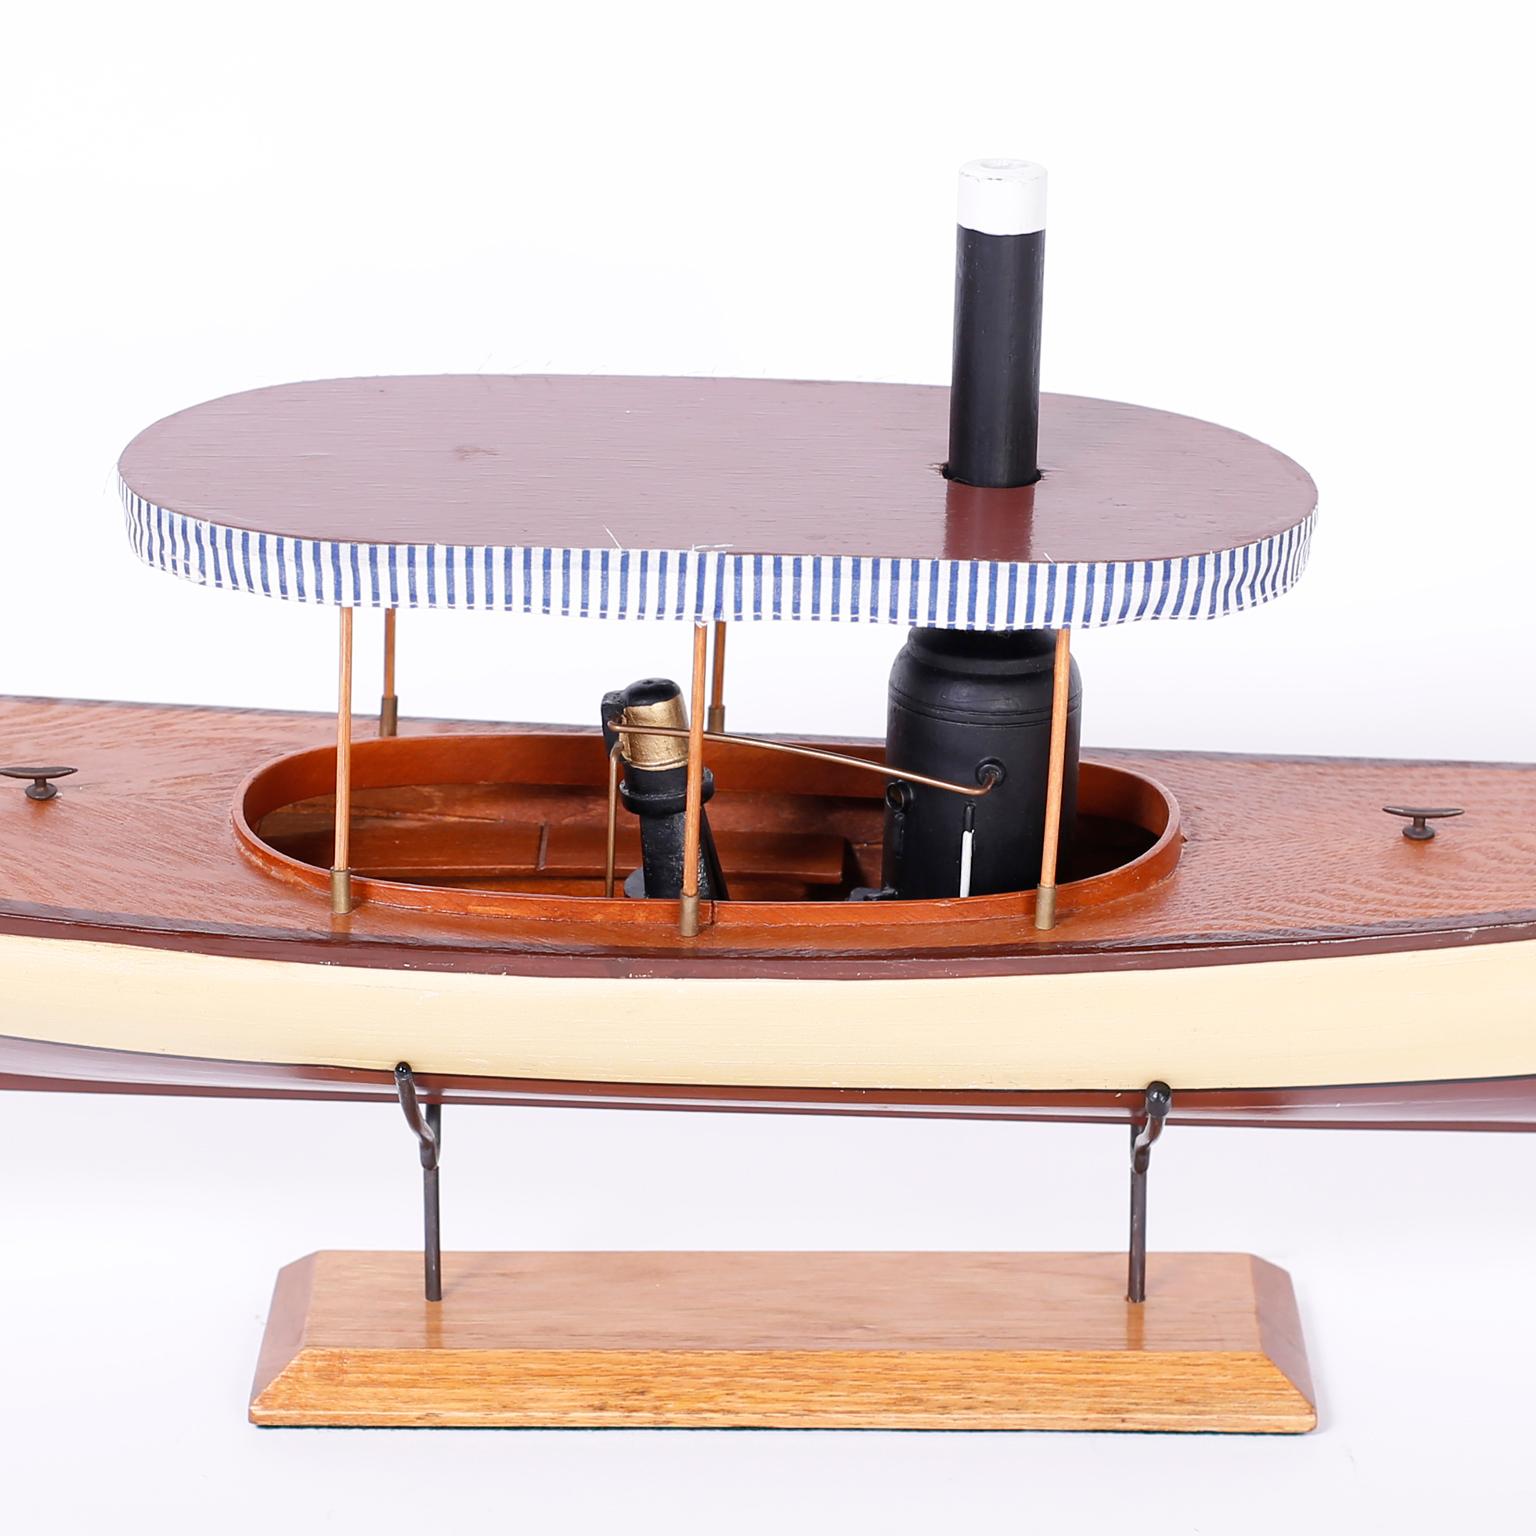 steam powered toy boat